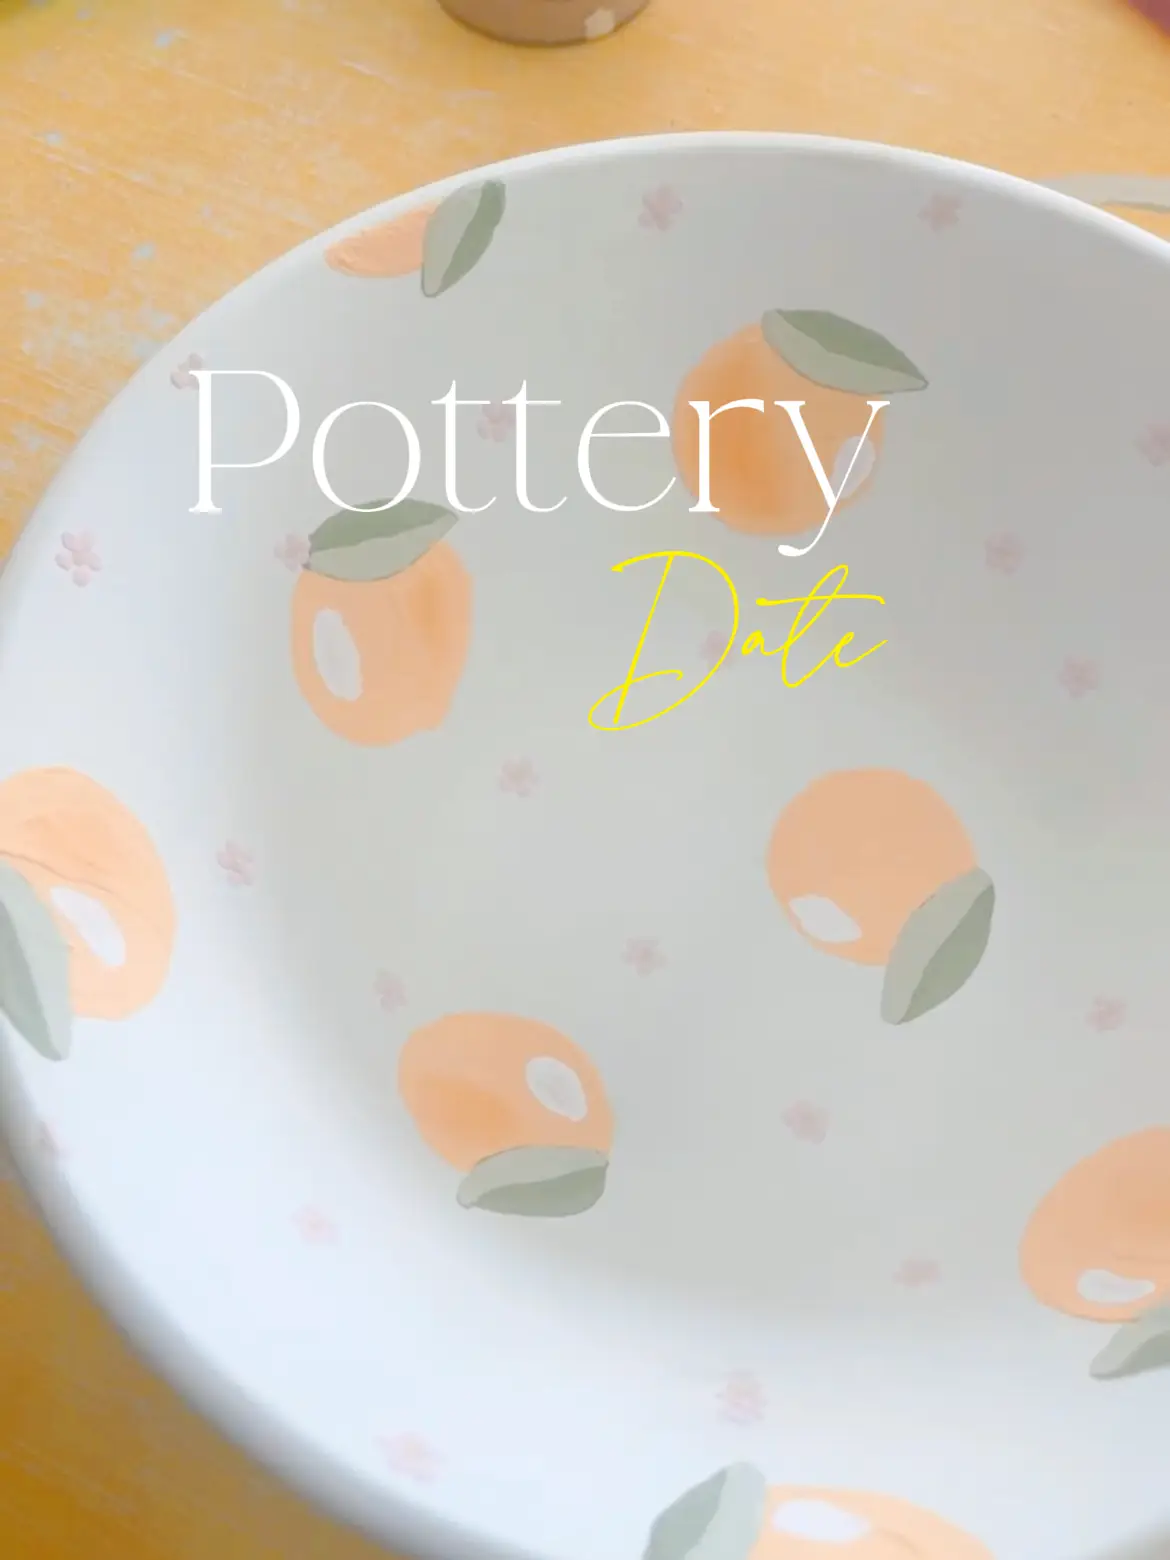 Painting Pottery in San Antonio - The Painted Plate